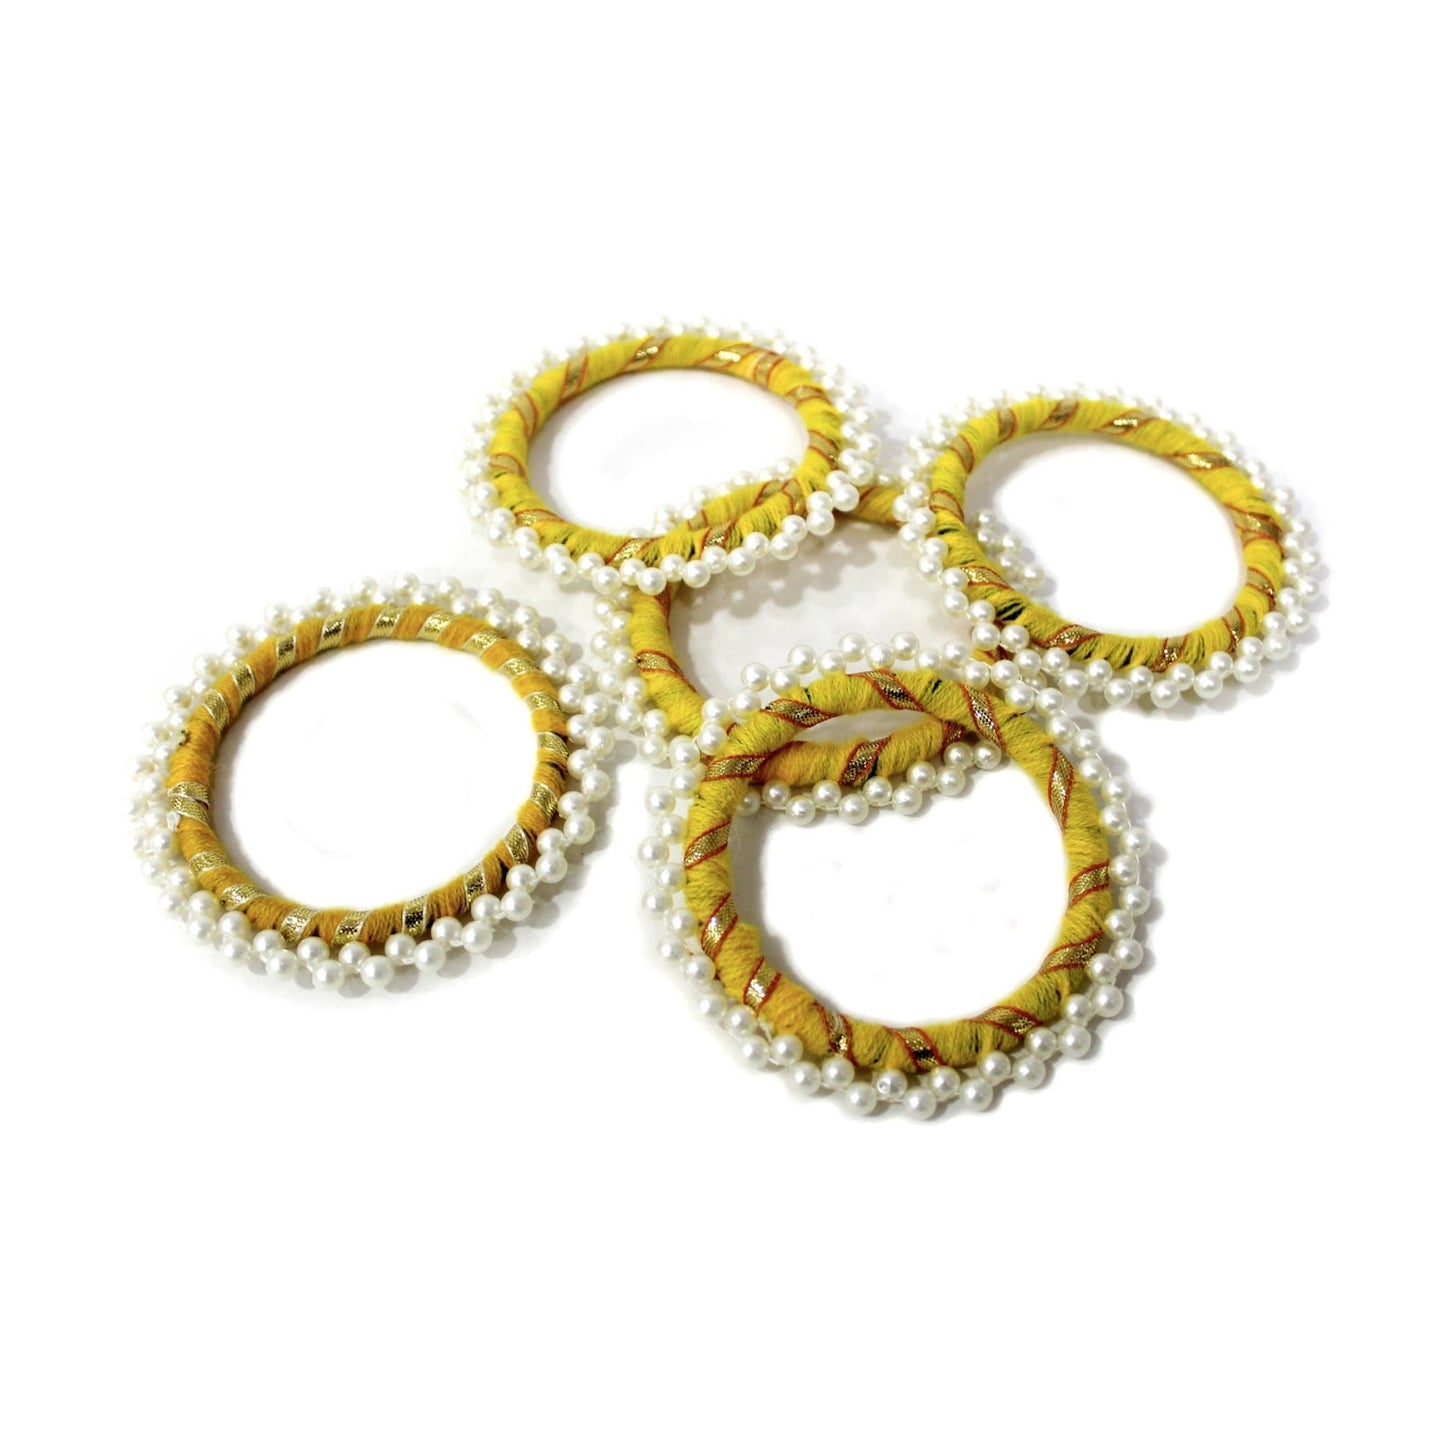 Threaded Round Bangle with Gota and Beads for Craft Packing Decoration - 11554, Large, Yellow